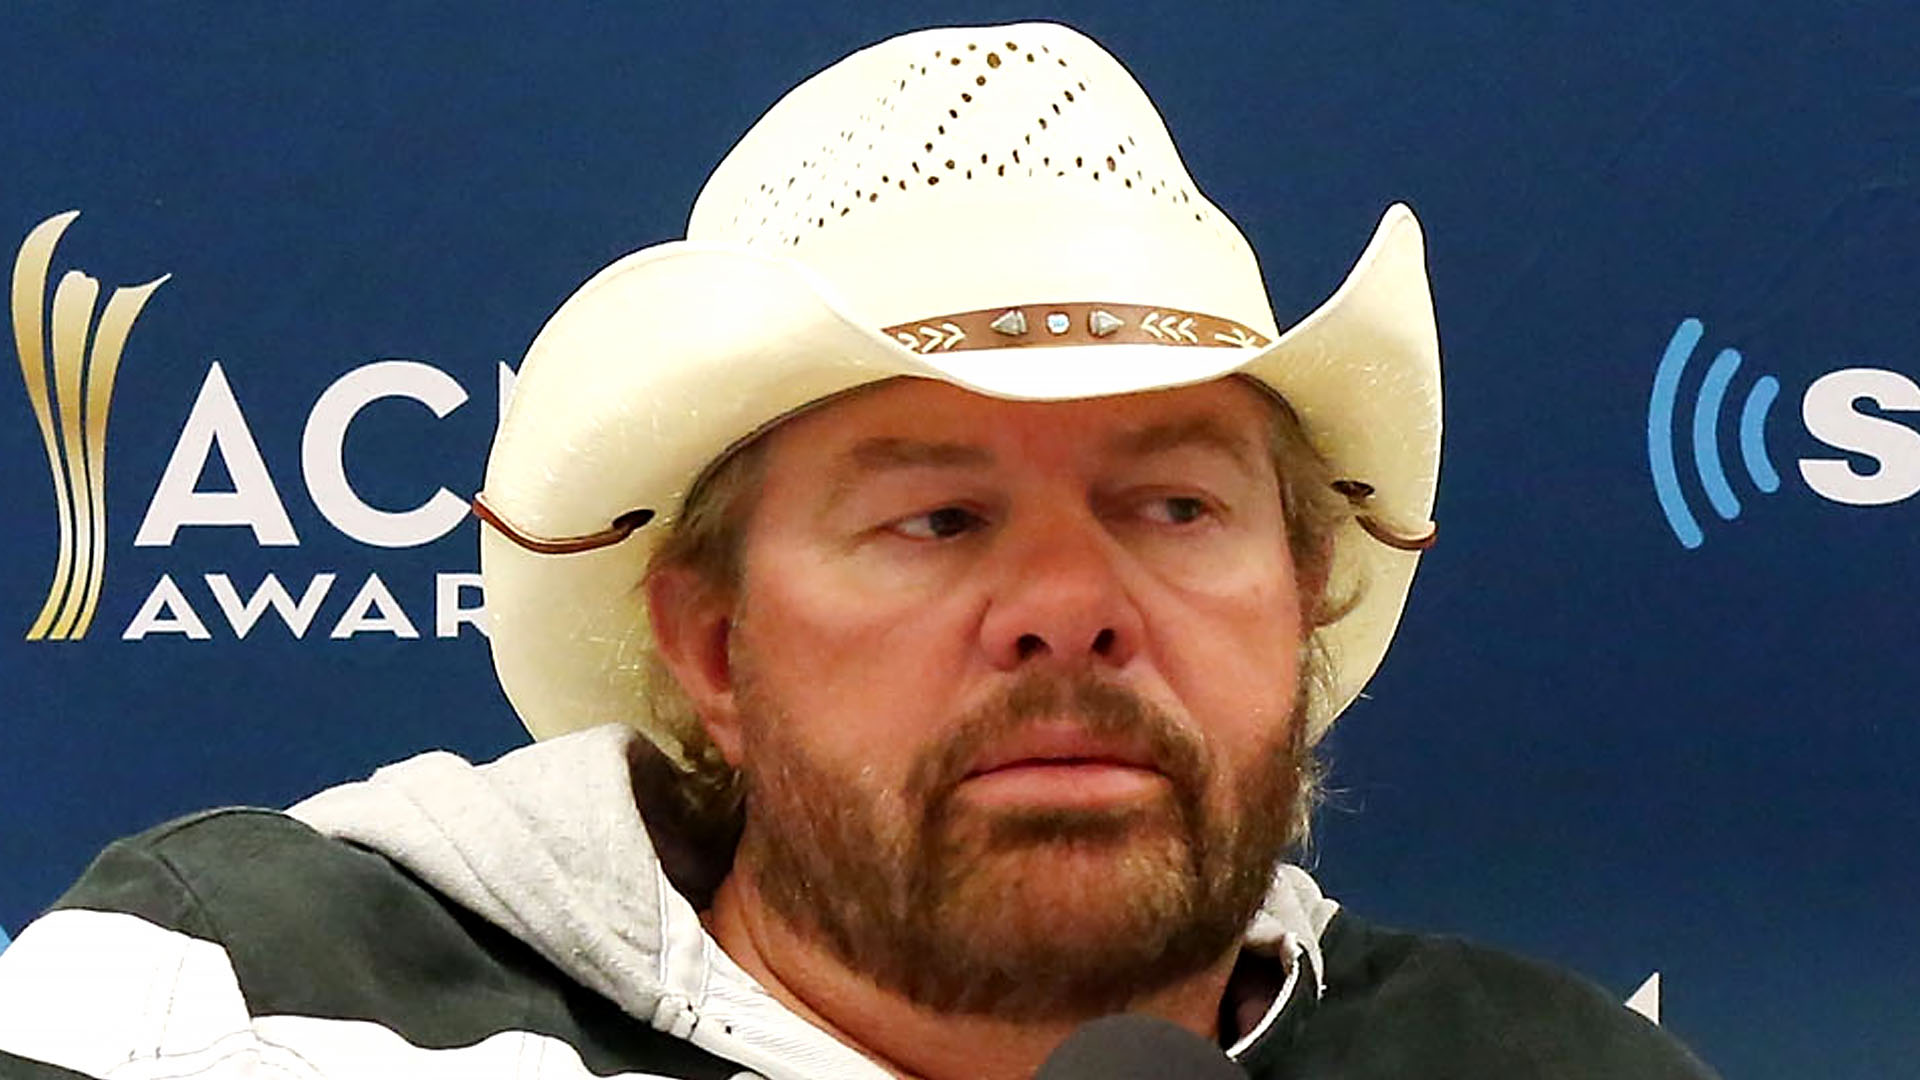 Inside Toby Keith's secret stomach cancer battle as fans suspect his tour will be canceled | The Sun